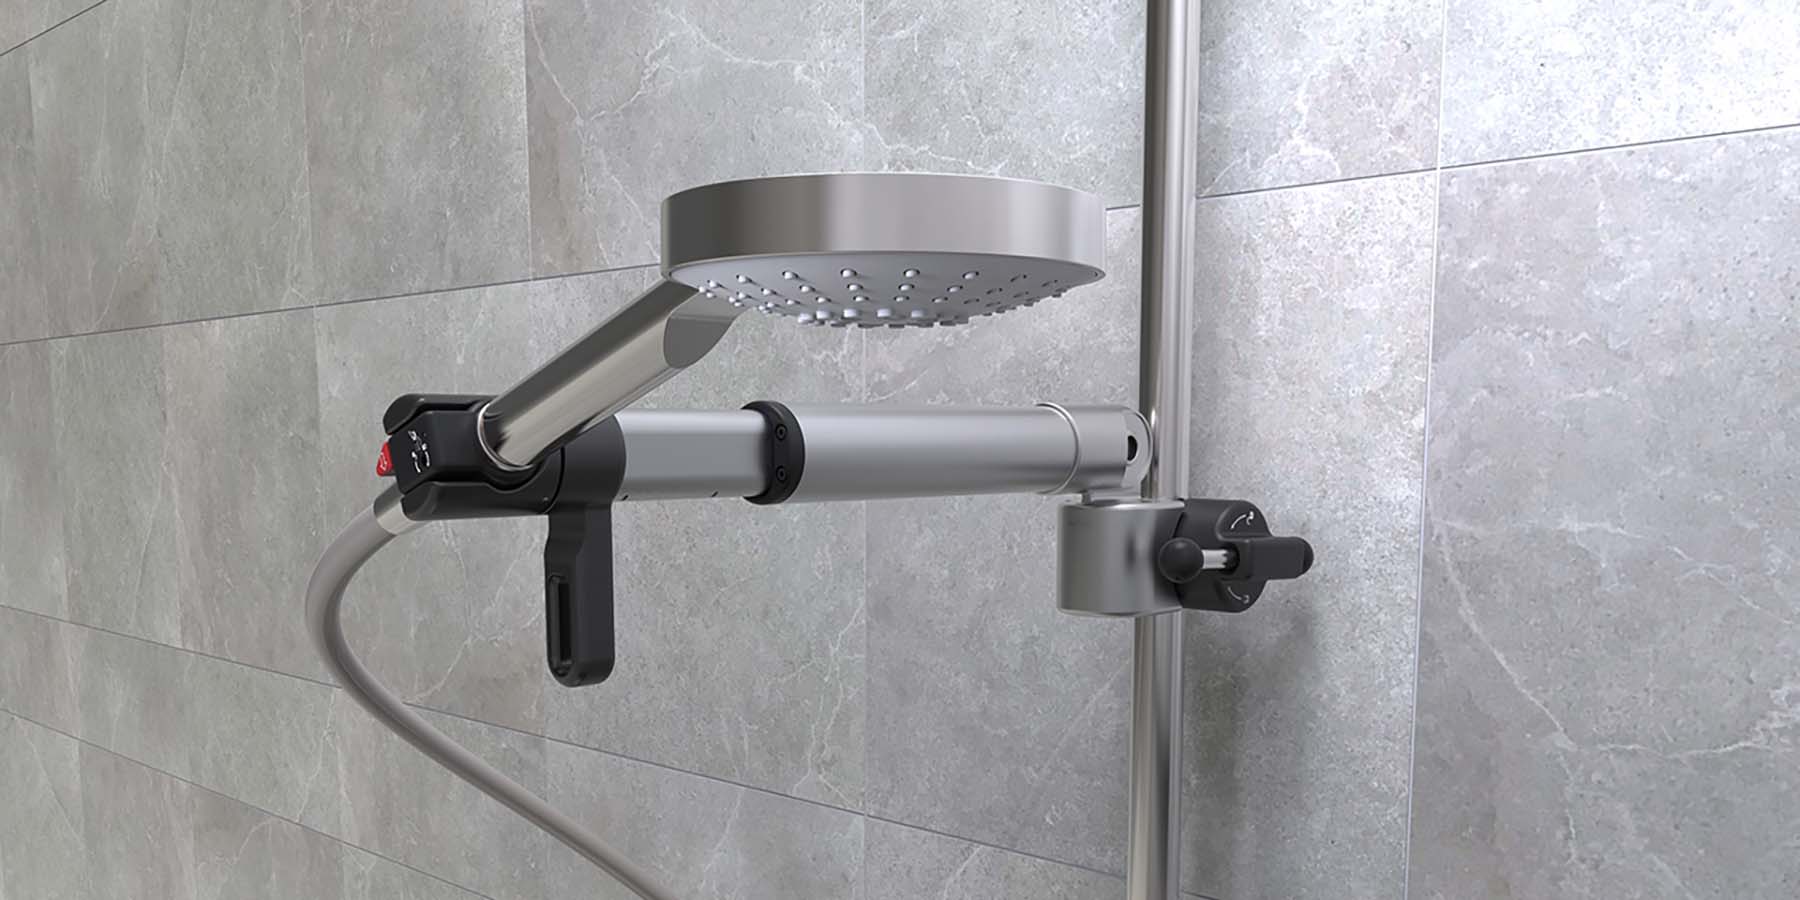 A picture of a telescopic shower head holder attached to a grab rail in front of a tiled wall